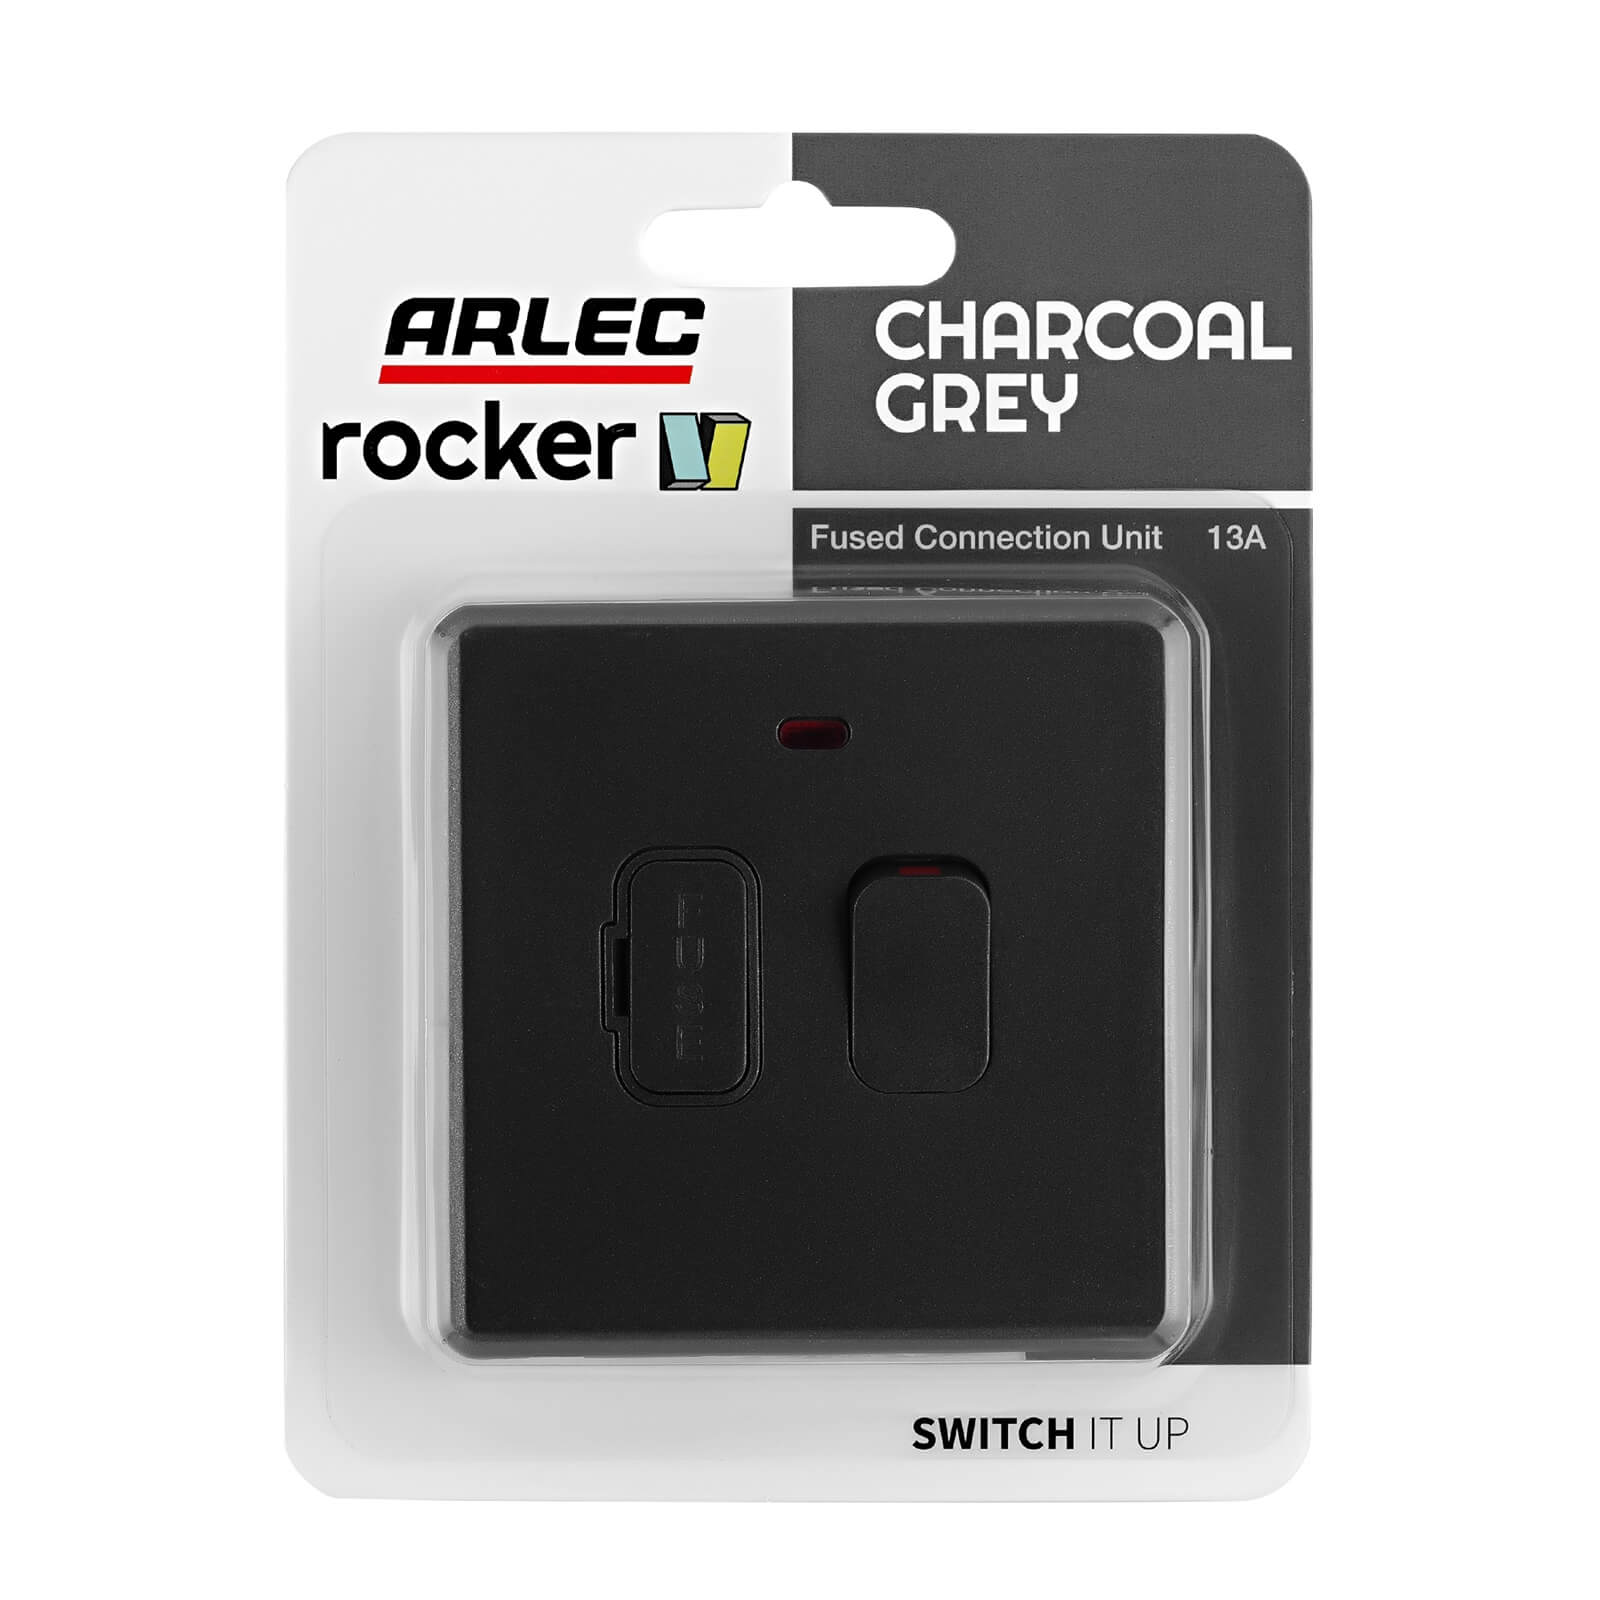 Arlec Rocker  13A Charcoal Grey Switched fused connection unit